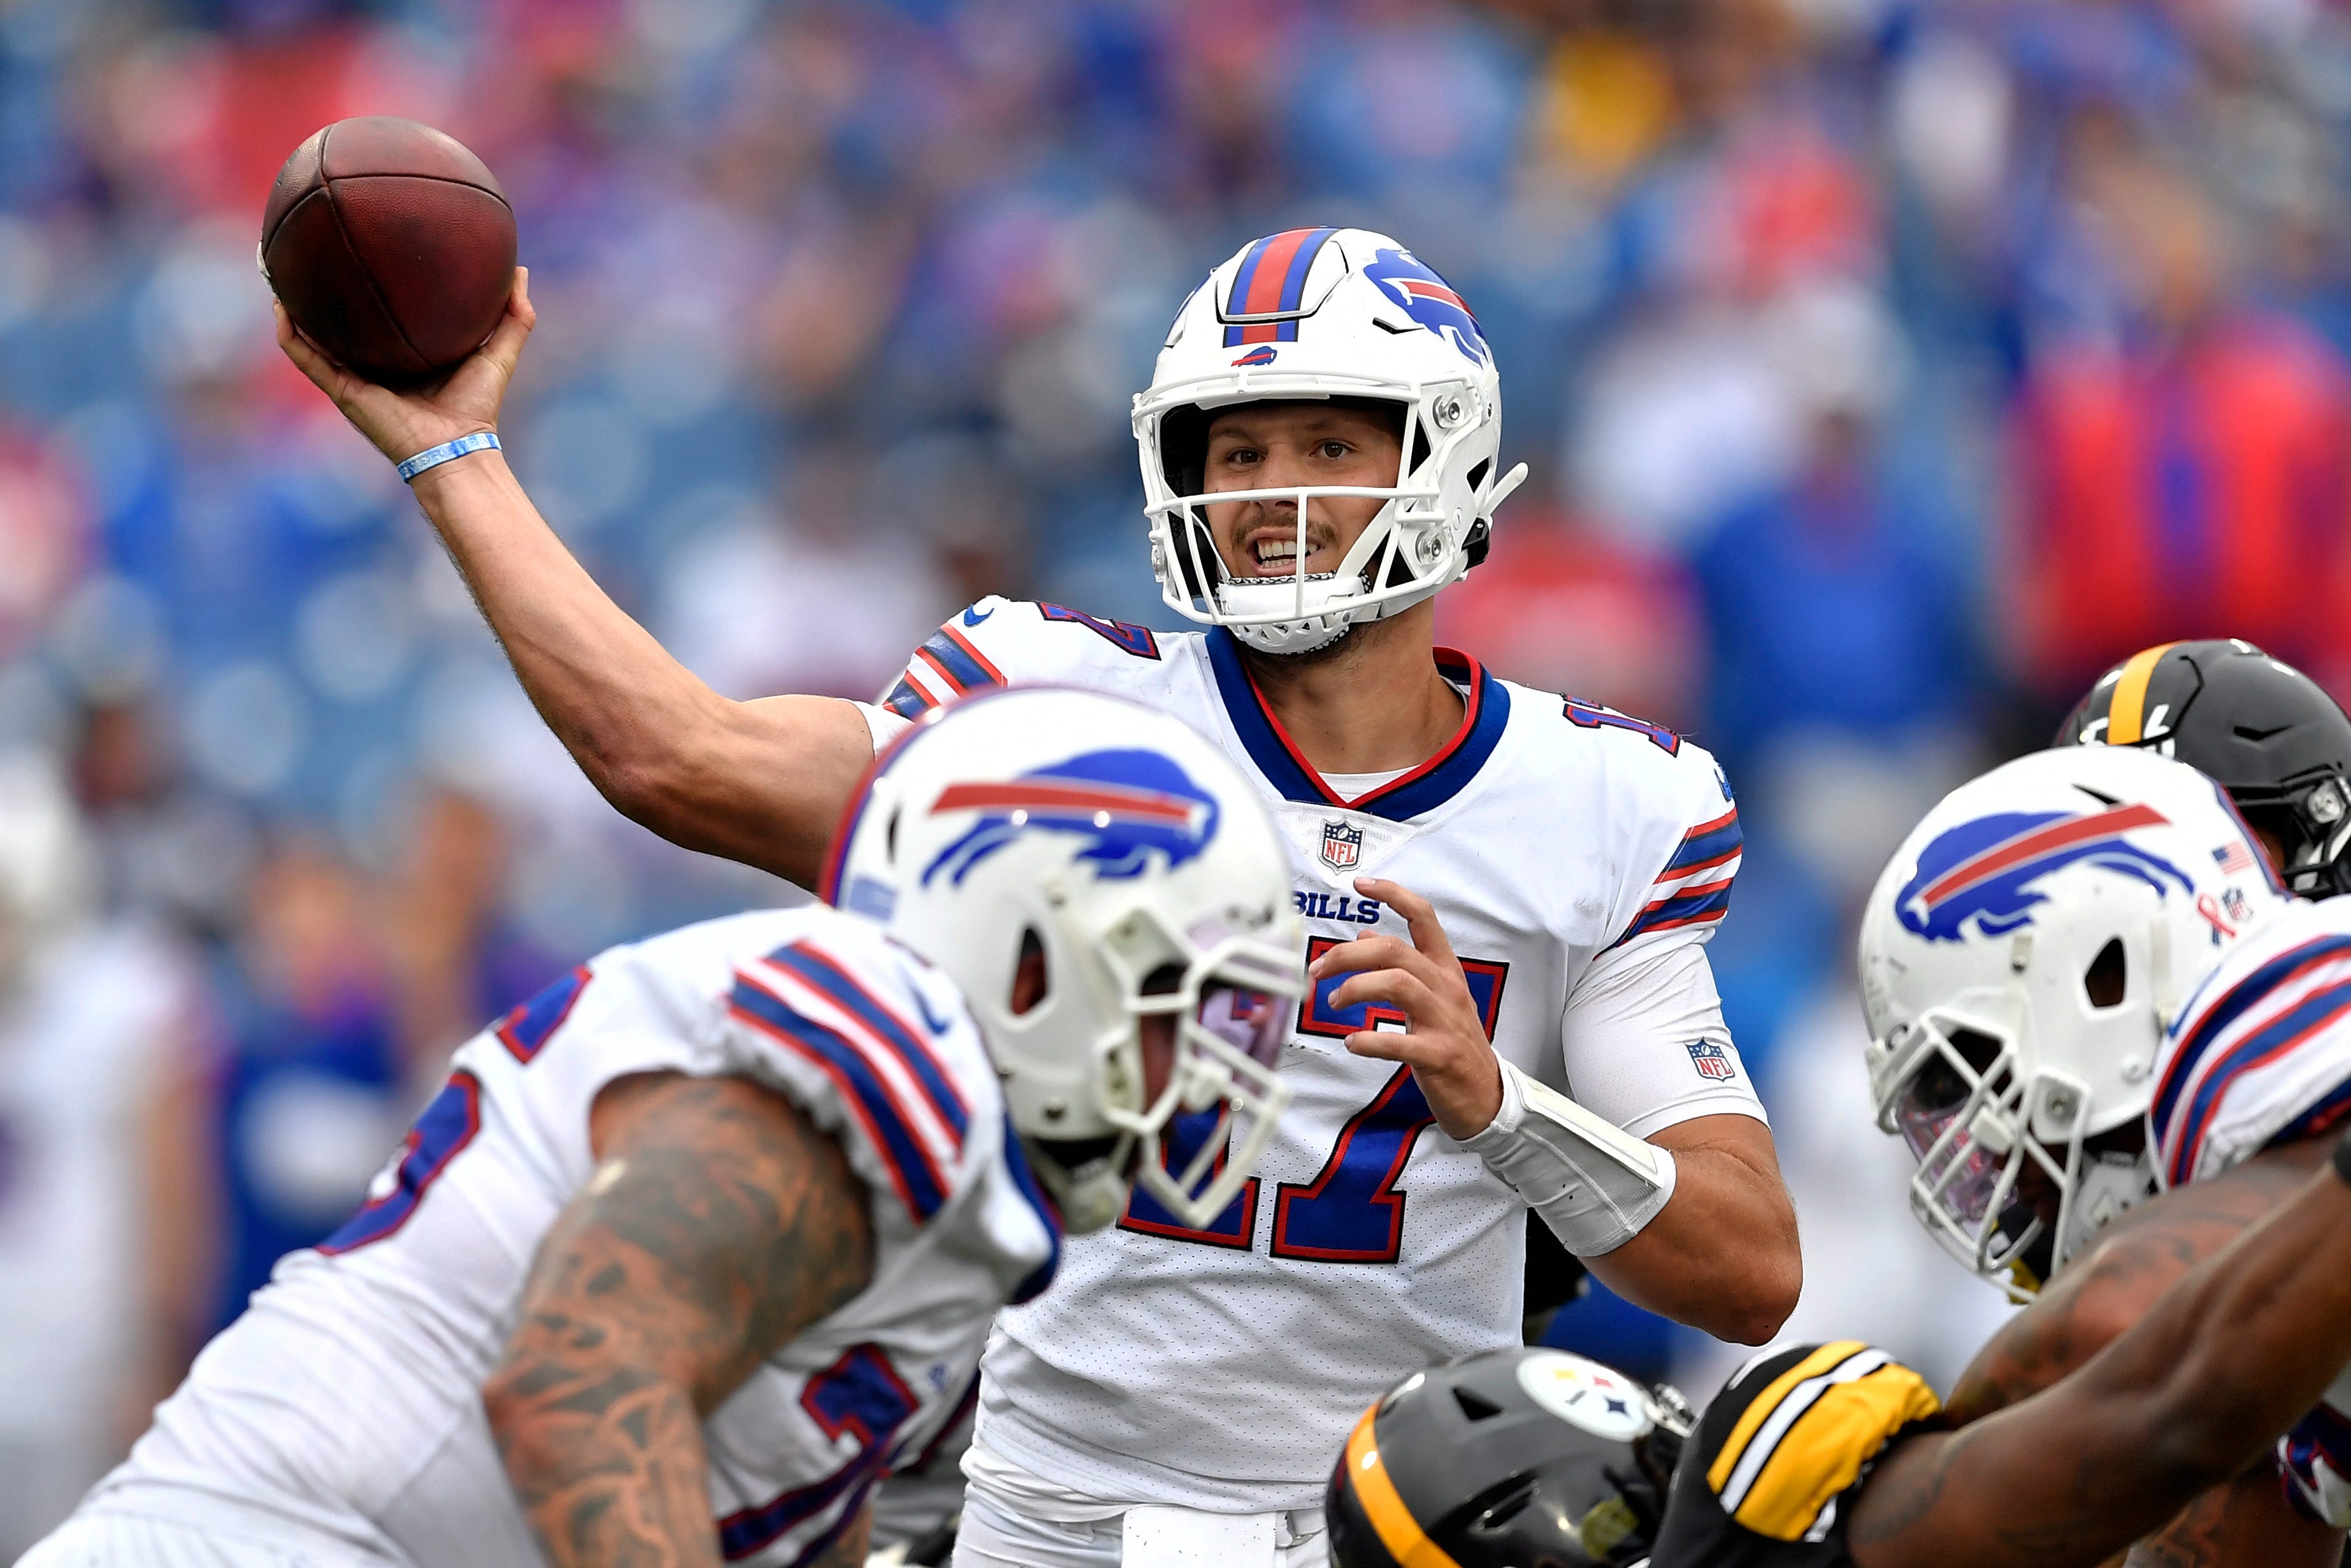 Jim Kelly reveals how Josh Allen can take his game to another level